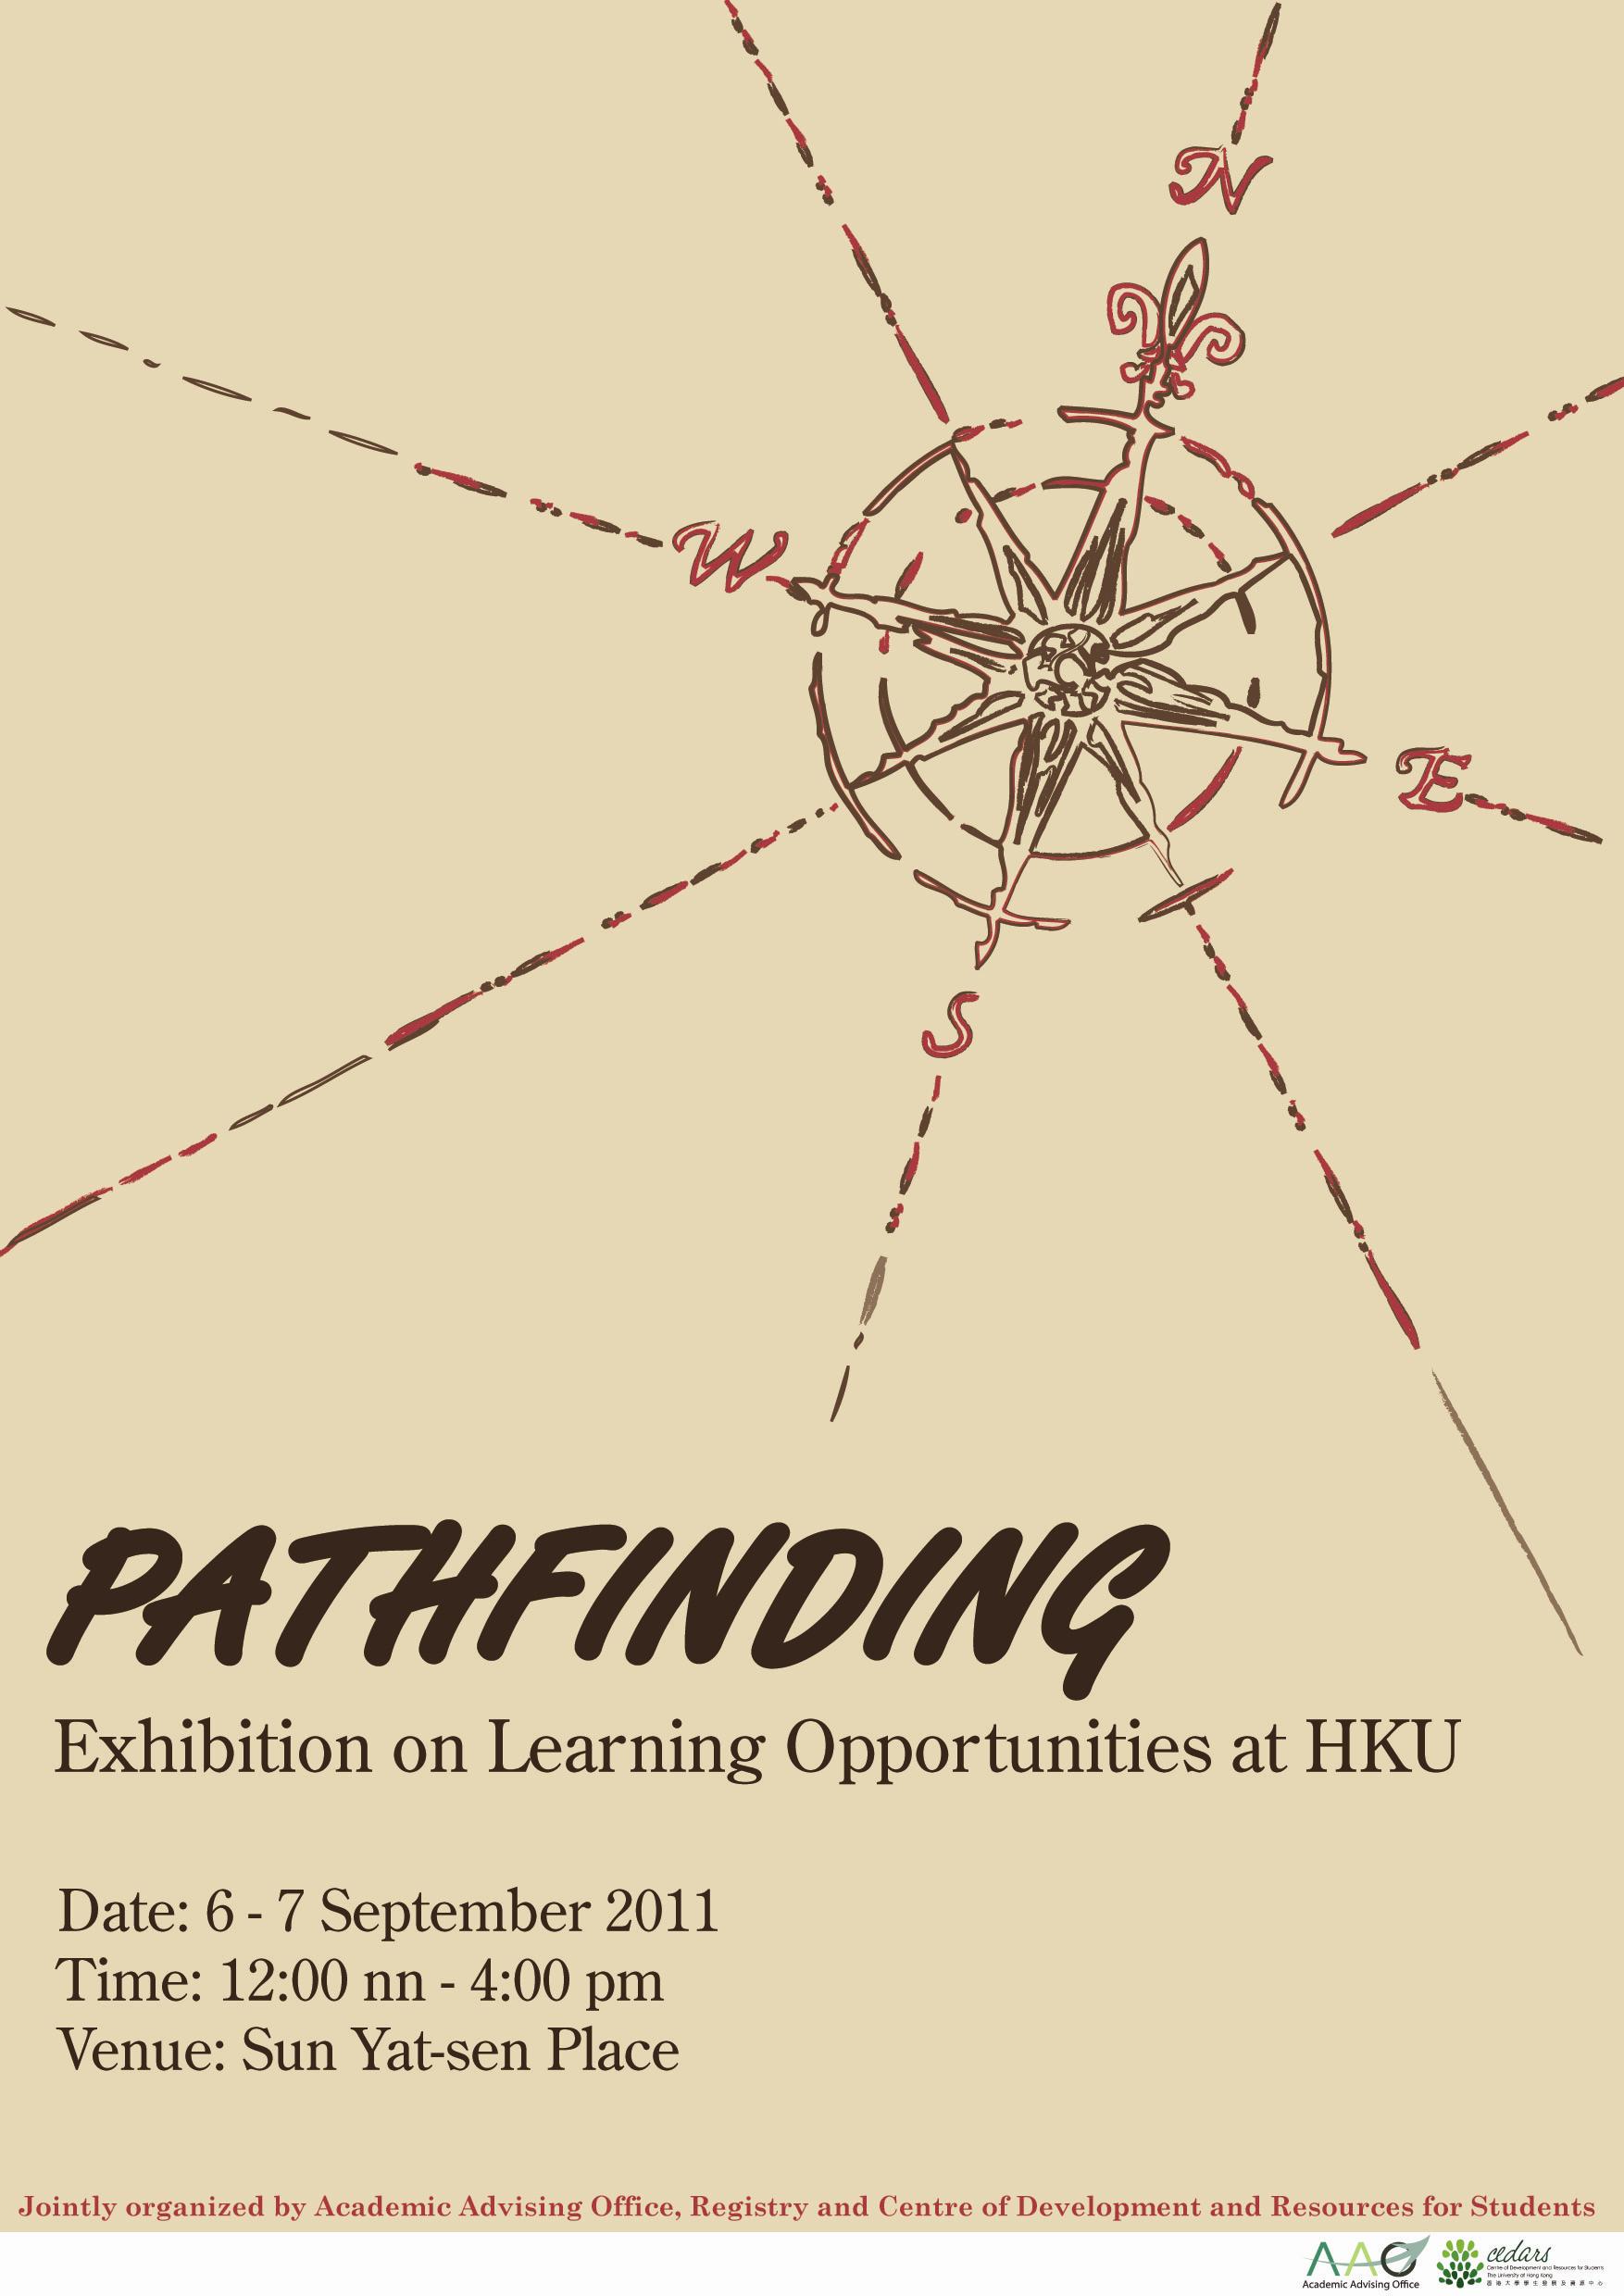 Pathfinding: Exhibition on Learning Opportunities at HKU